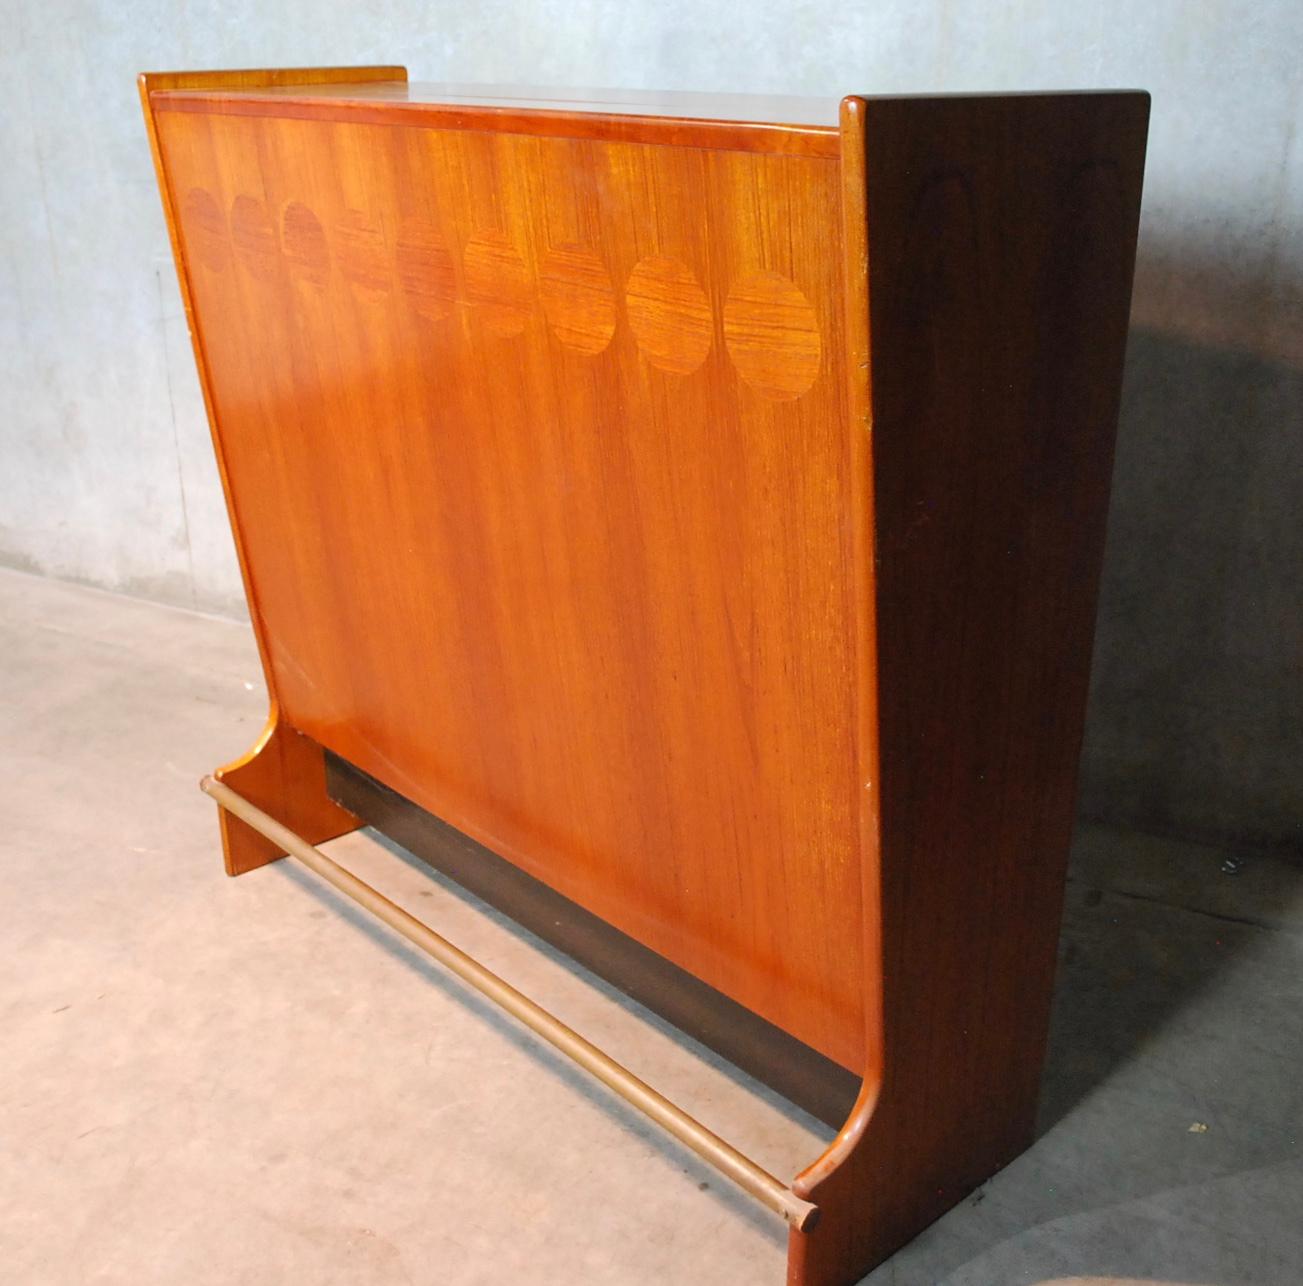 A stunning freestanding teak bar from the 1960s designed by Johannes Andersen for J. Skaaning & Son of Denmark. Beautifully decorated on both sides with cross grained elliptical marquetry and sculpted door pulls. Upper section flips and drops open